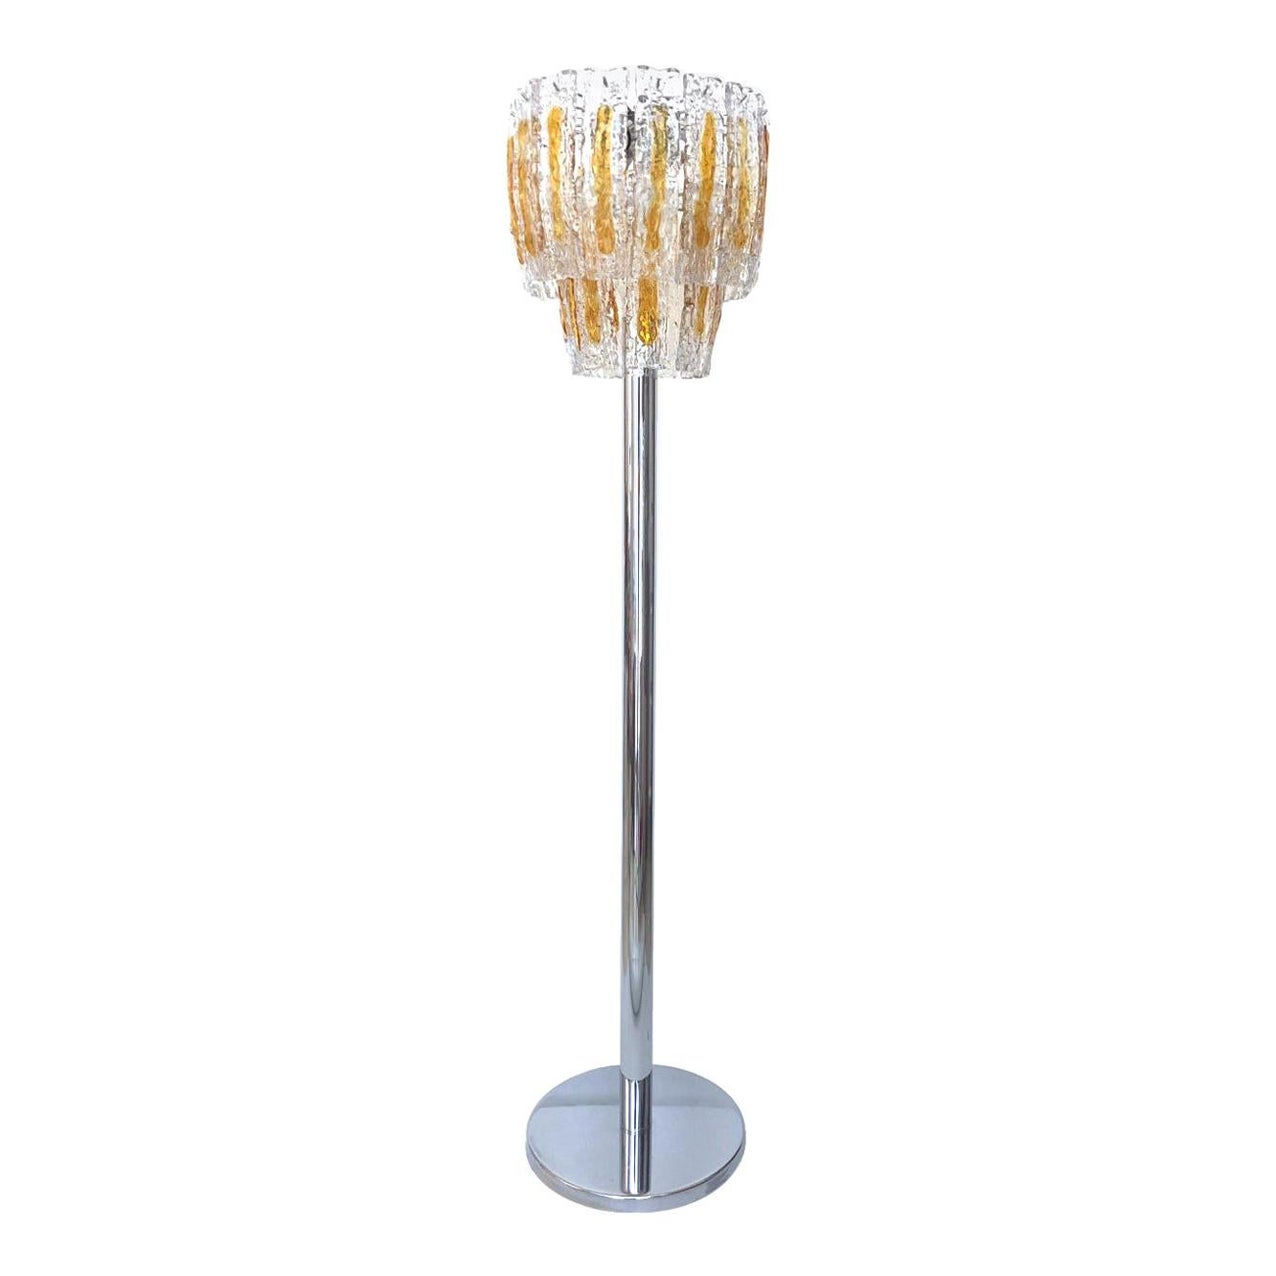 Italian Midcentury Amber Clear Murano Glass Floor Lamp by Mazzega, 1970s For Sale